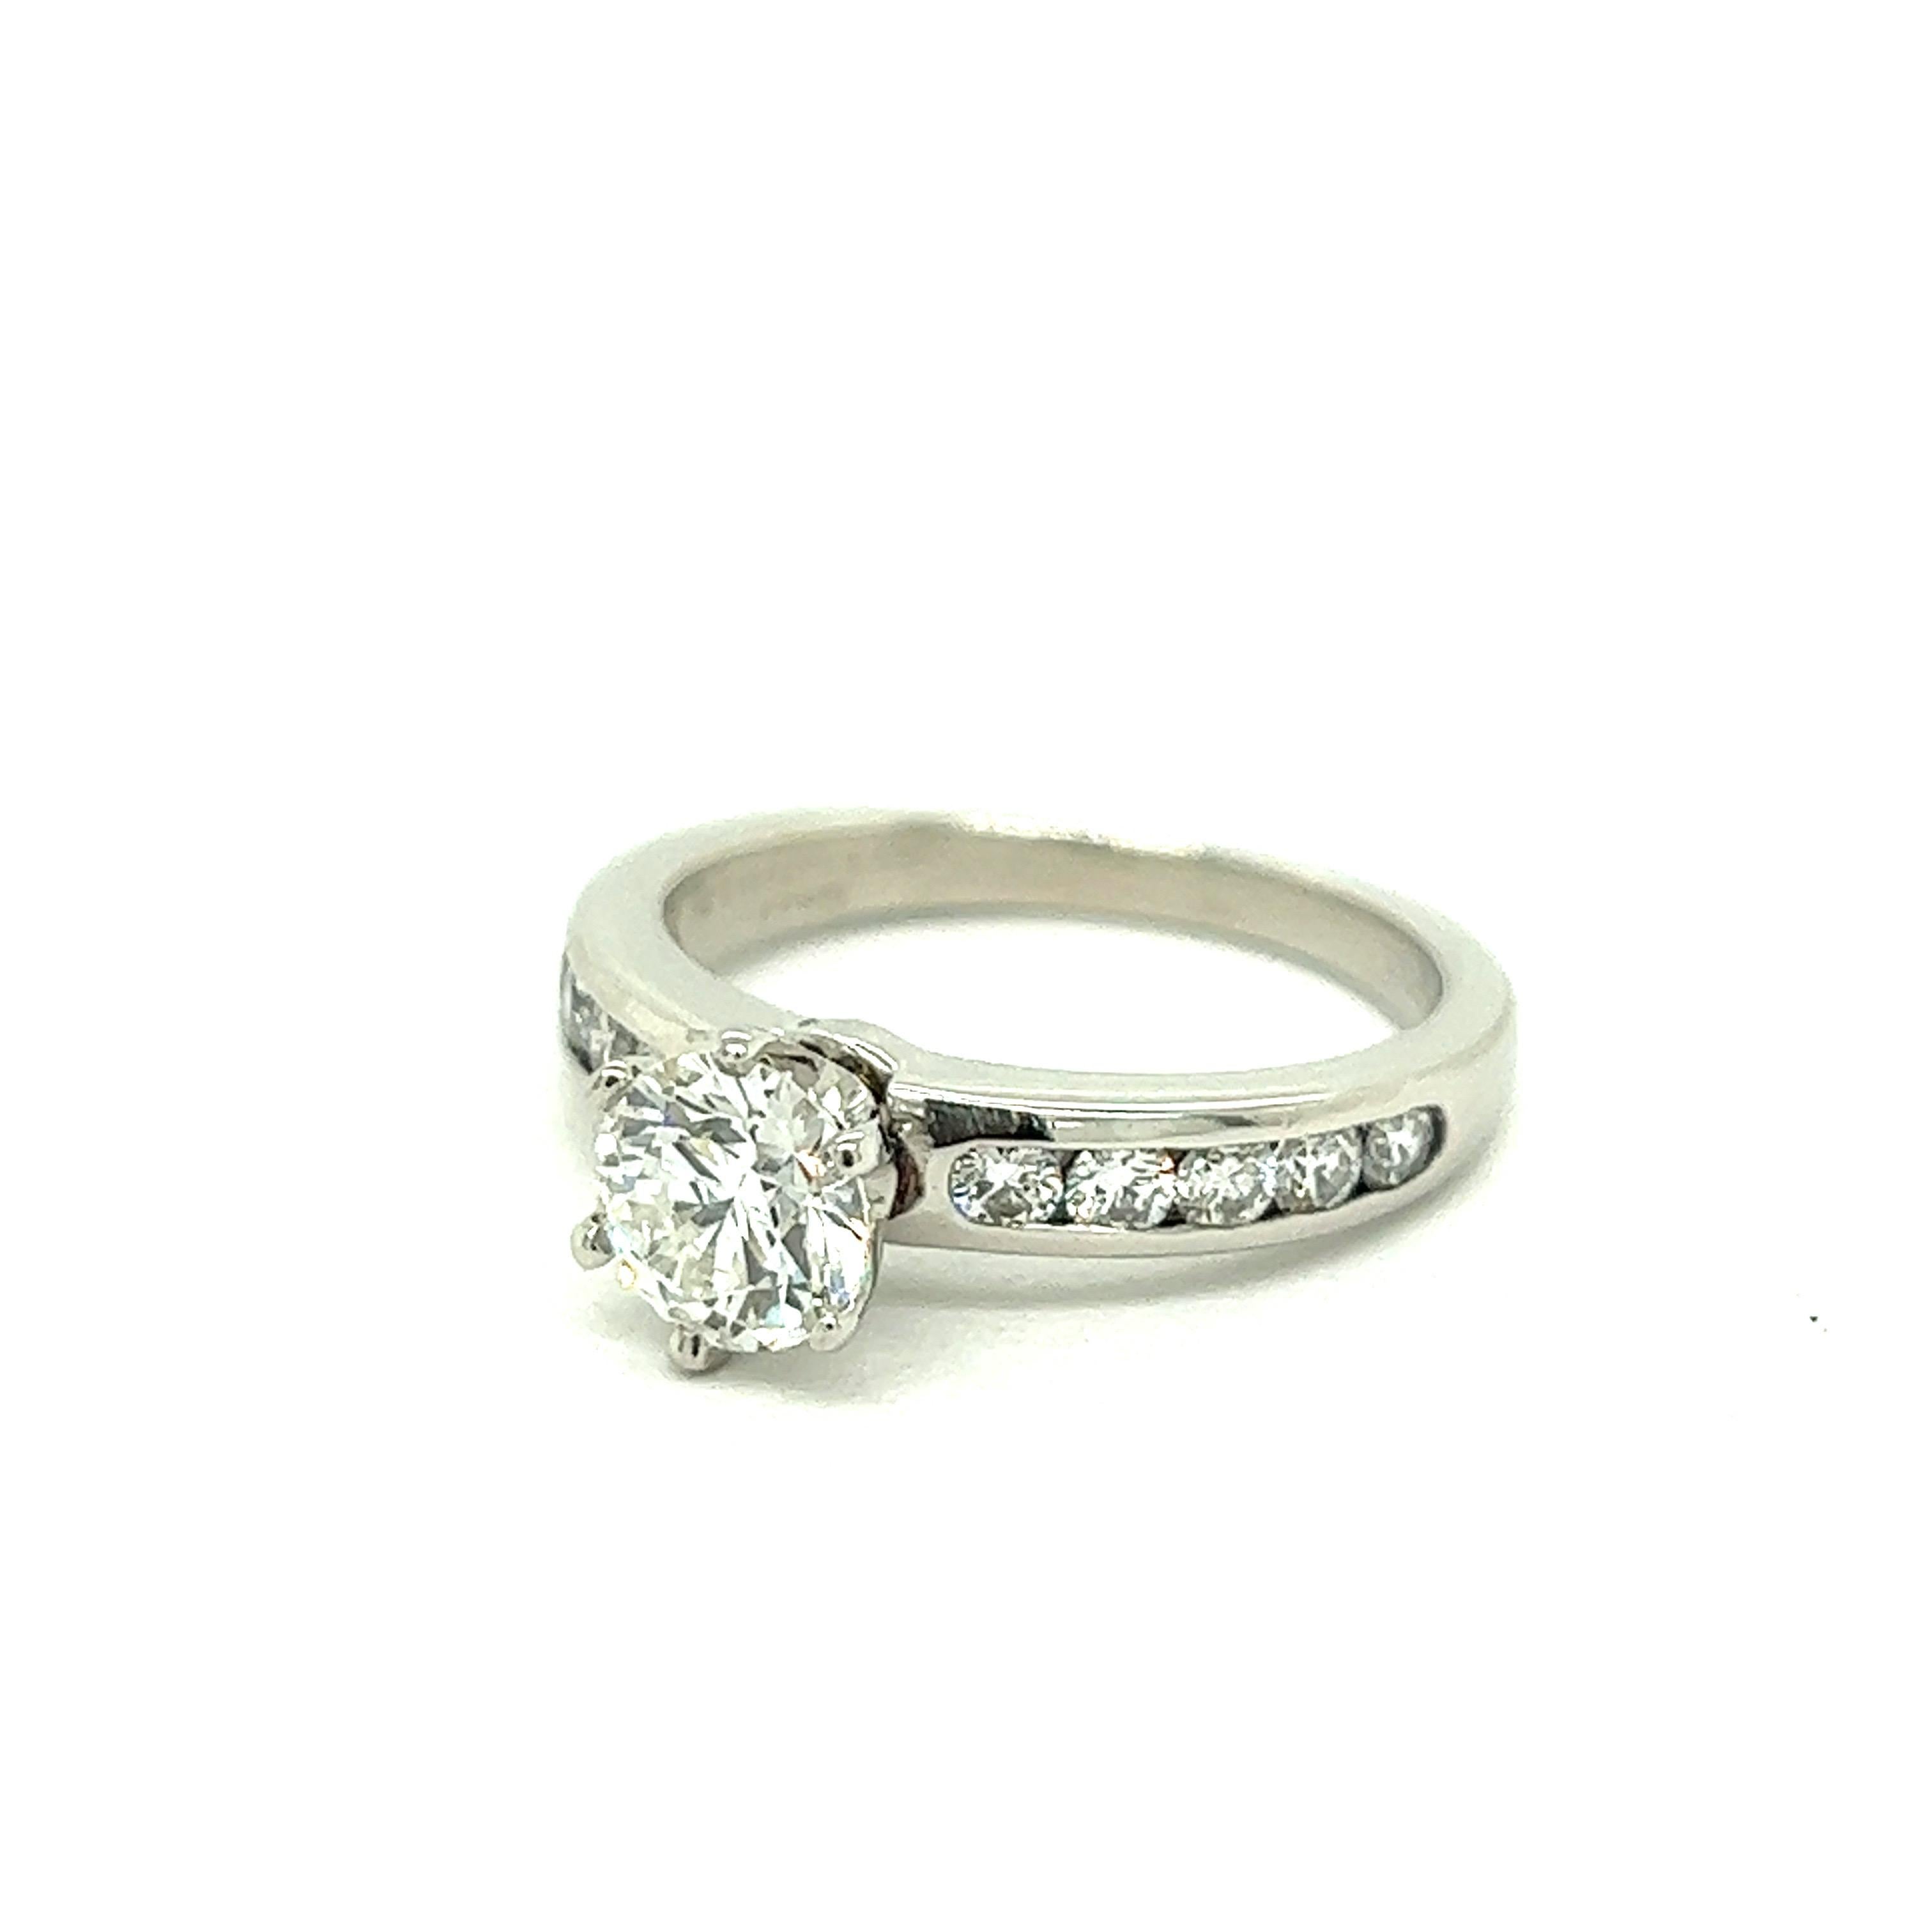 Tiffany & Co. 0.77 Carat Diamond Solitaire Engagement Ring For Sale 4